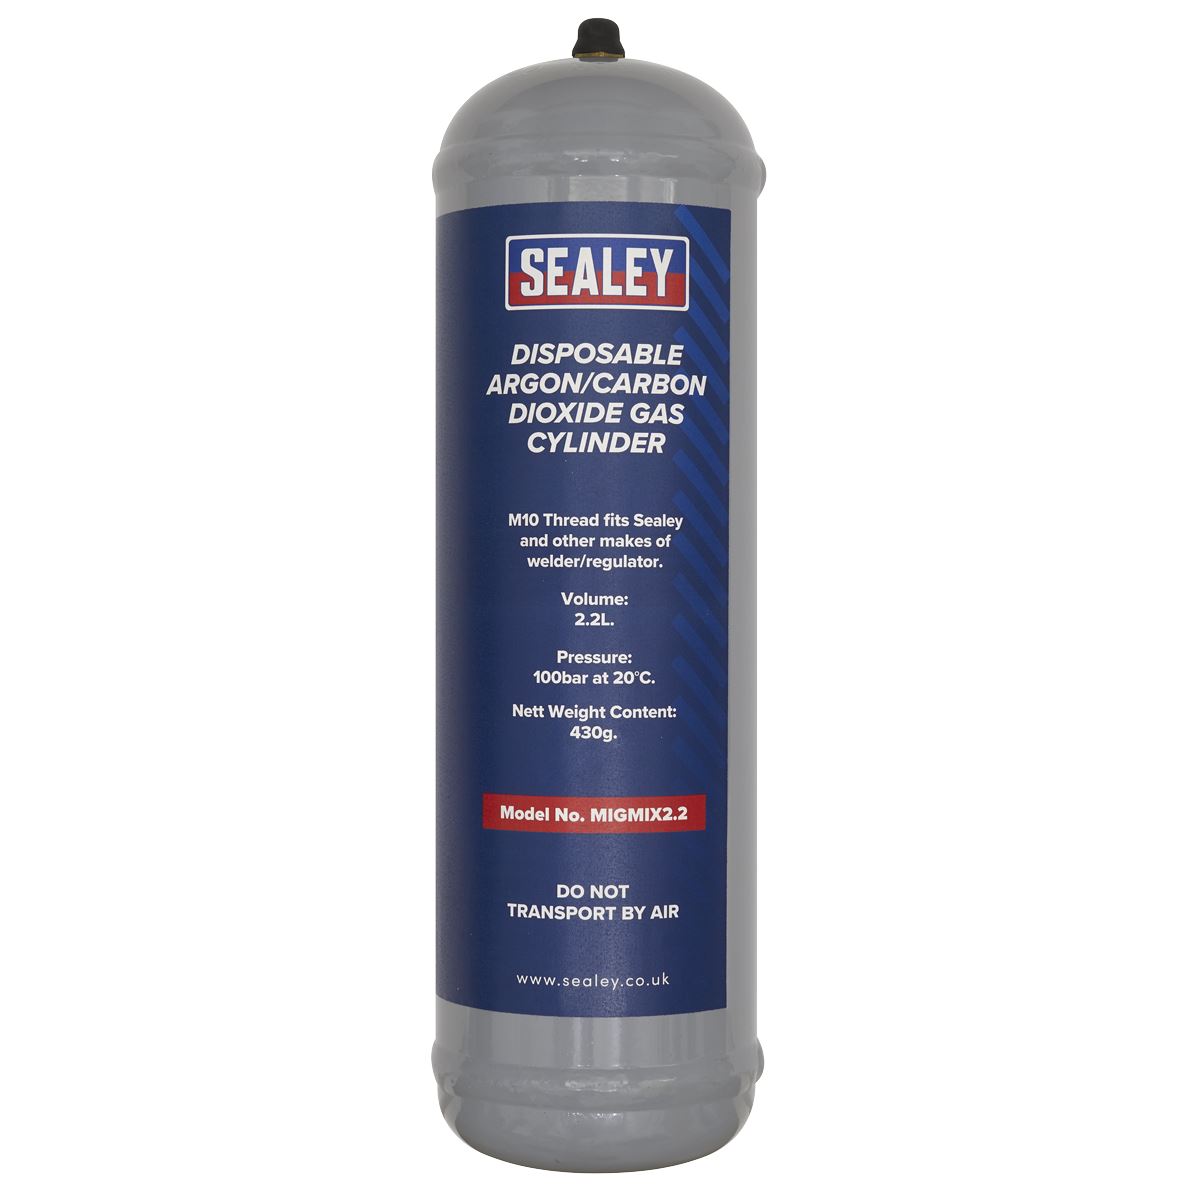 Sealey 430g Disposable Argon/Carbon Dioxide Gas Cylinder